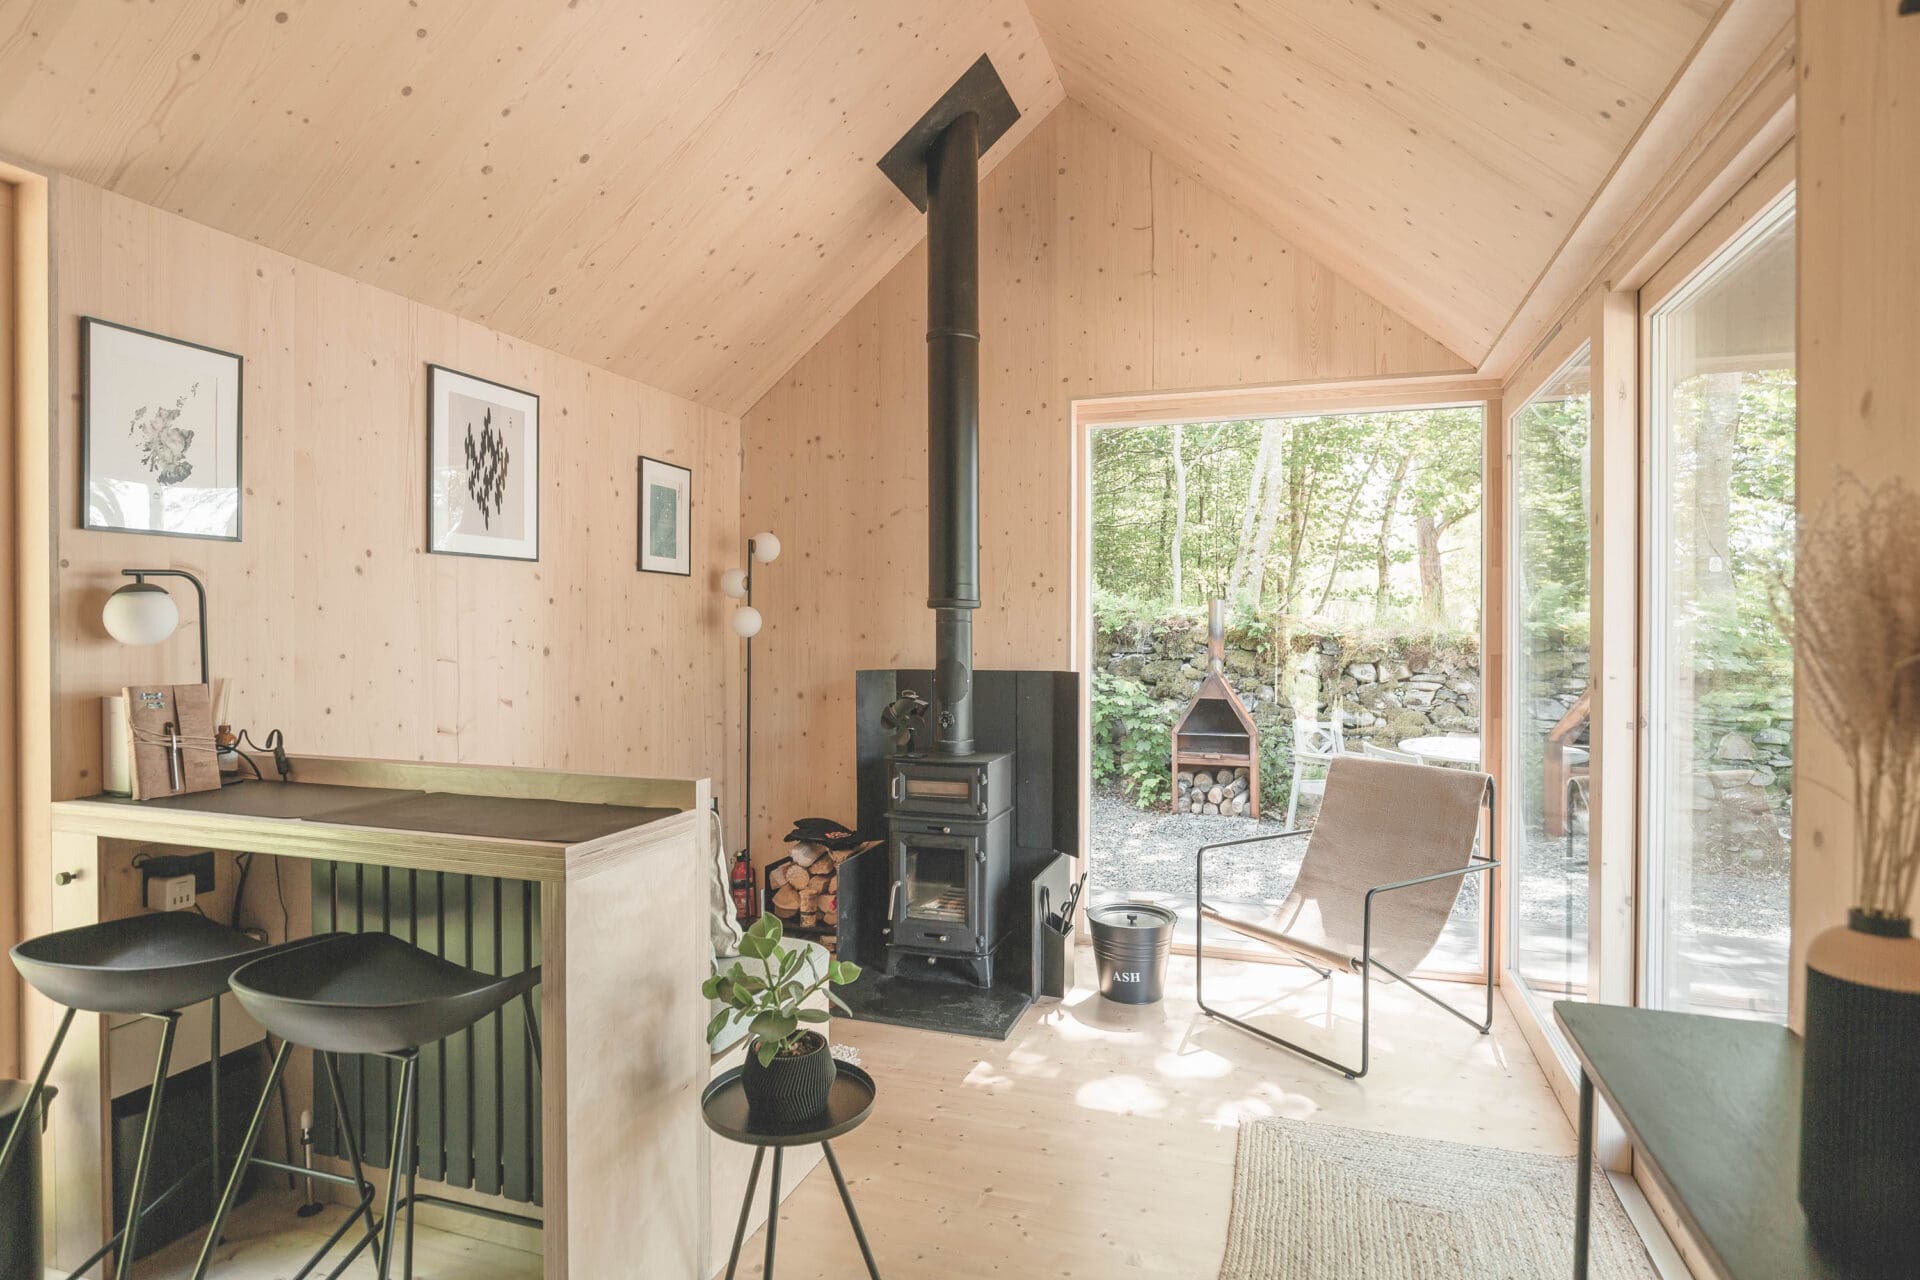 Kip Hideaways: inside a cabin, with a wood burner in an open-plan living space with armchairs and a breakfast bar